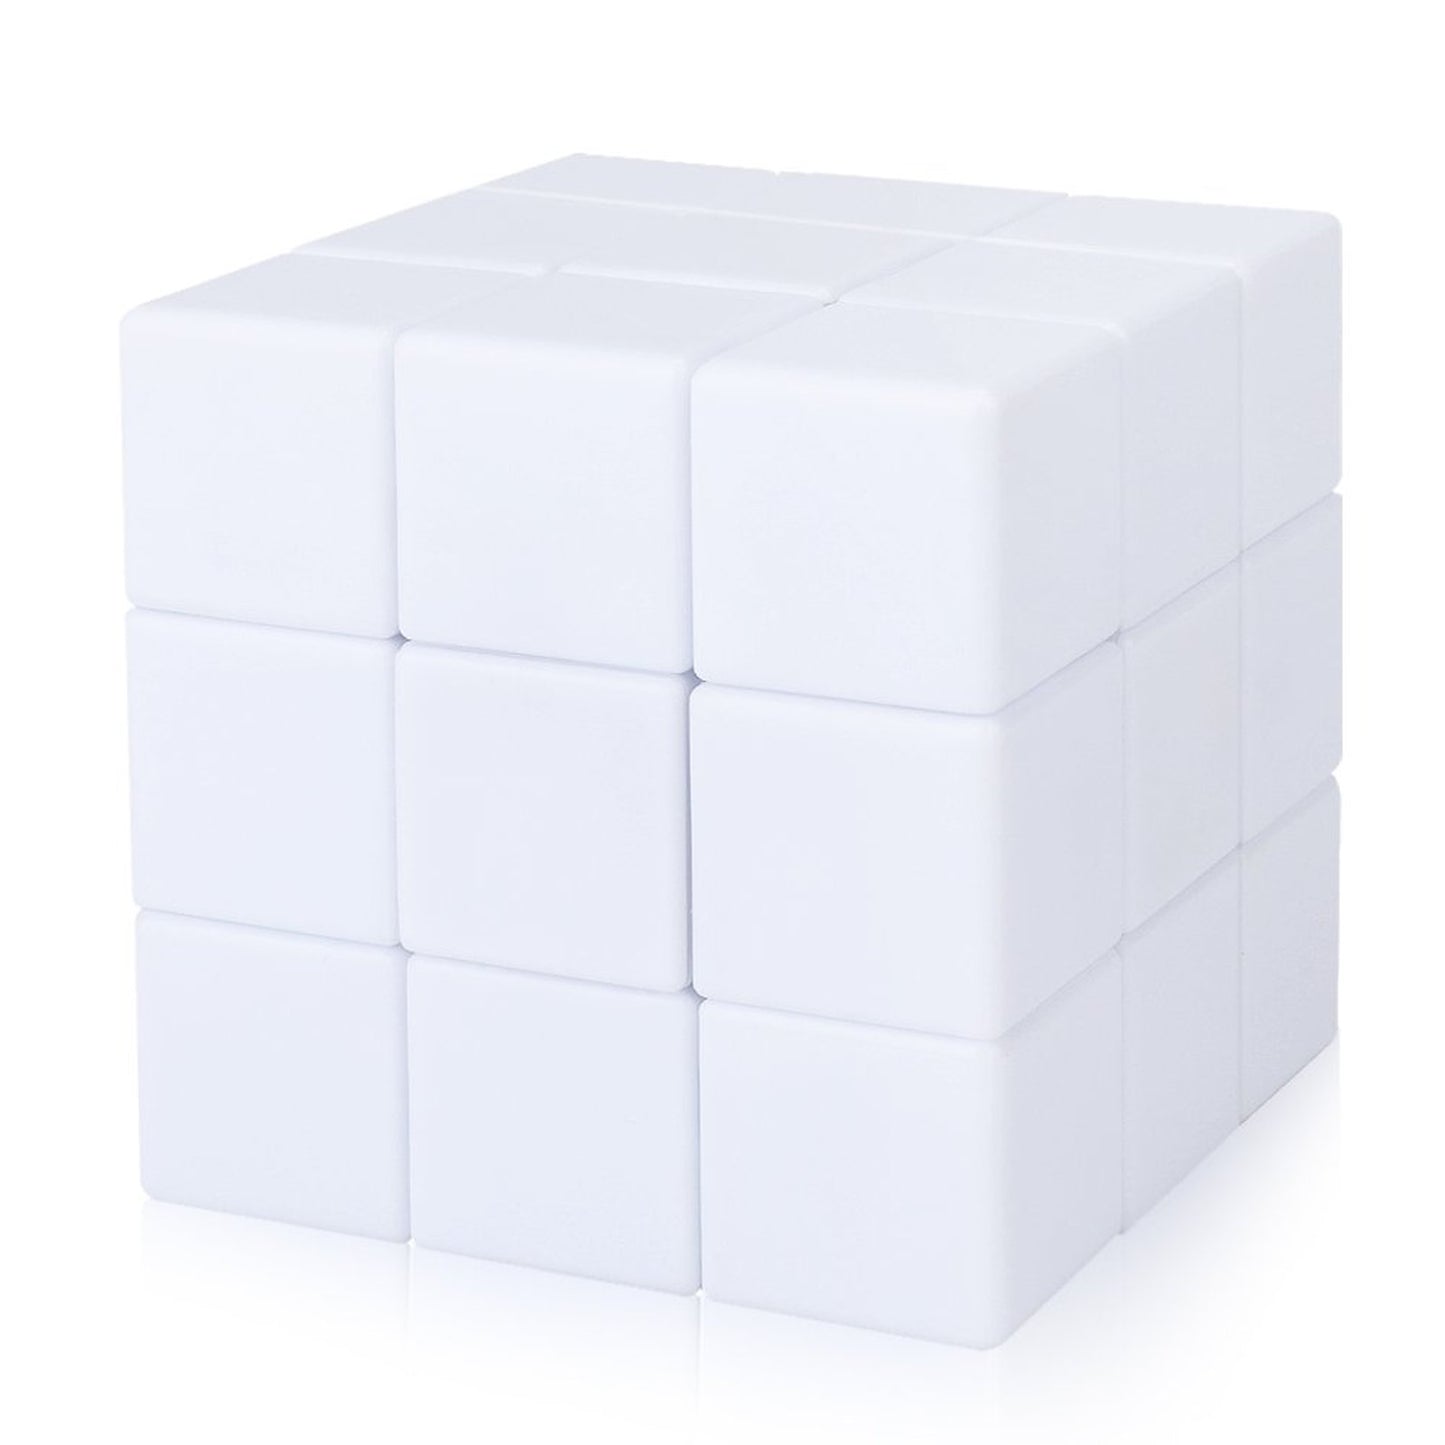 Personalize Your Own 3x3 Magic Cube